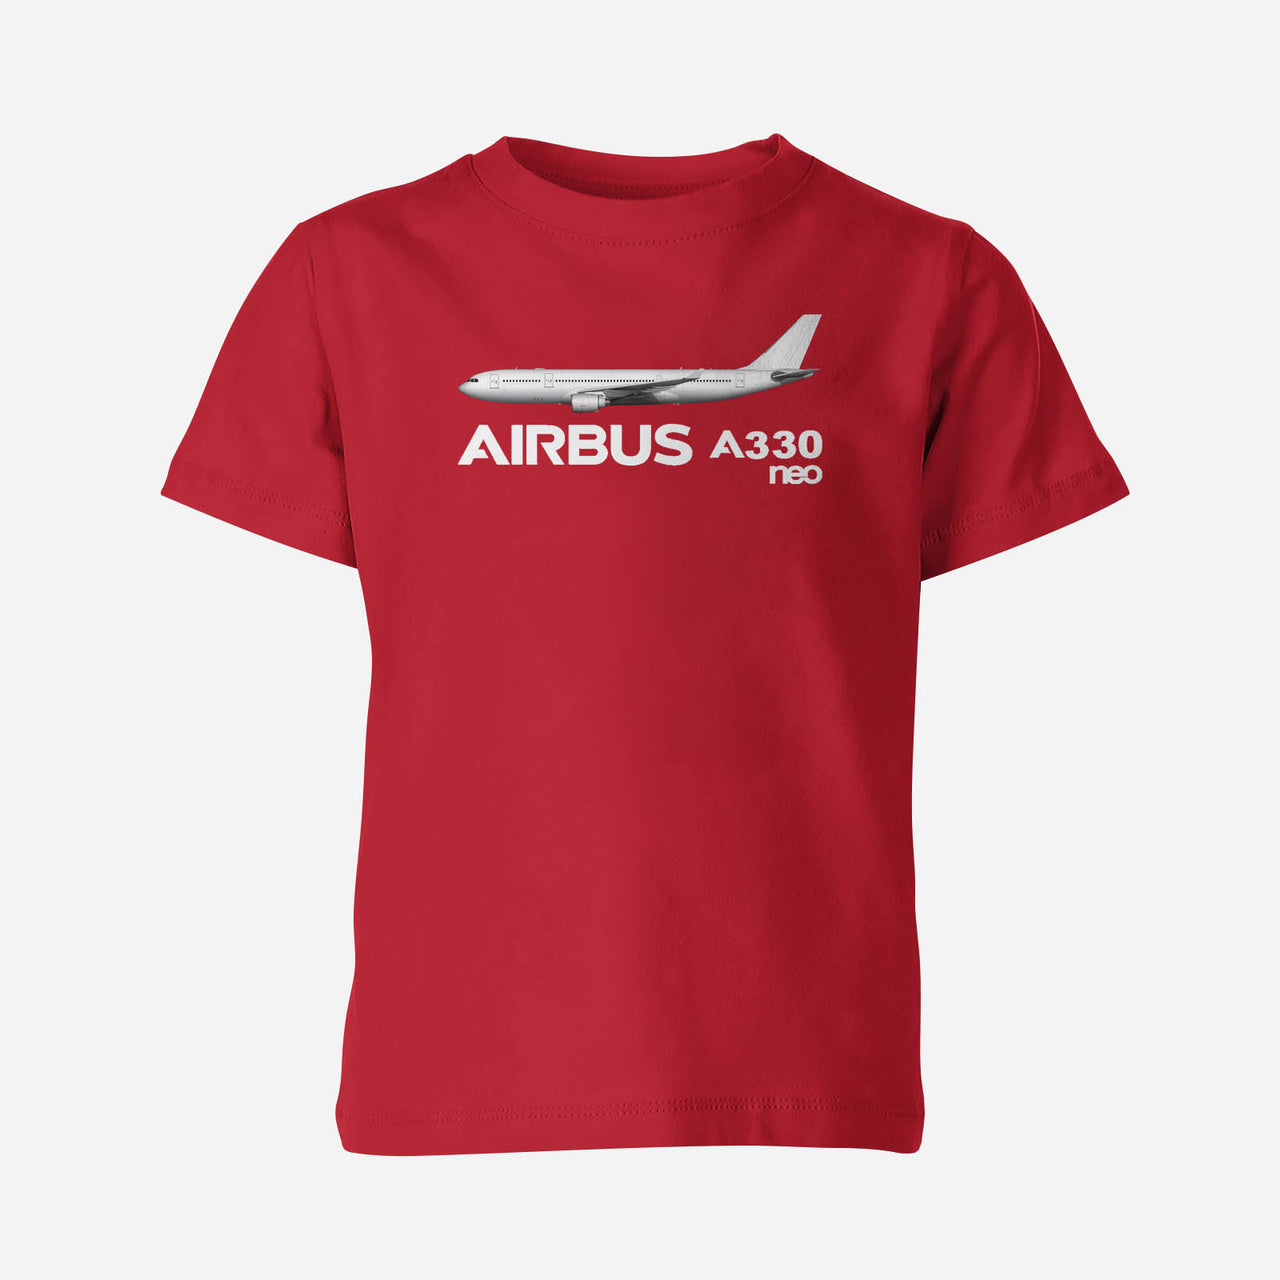 The Airbus A330neo Designed Children T-Shirts